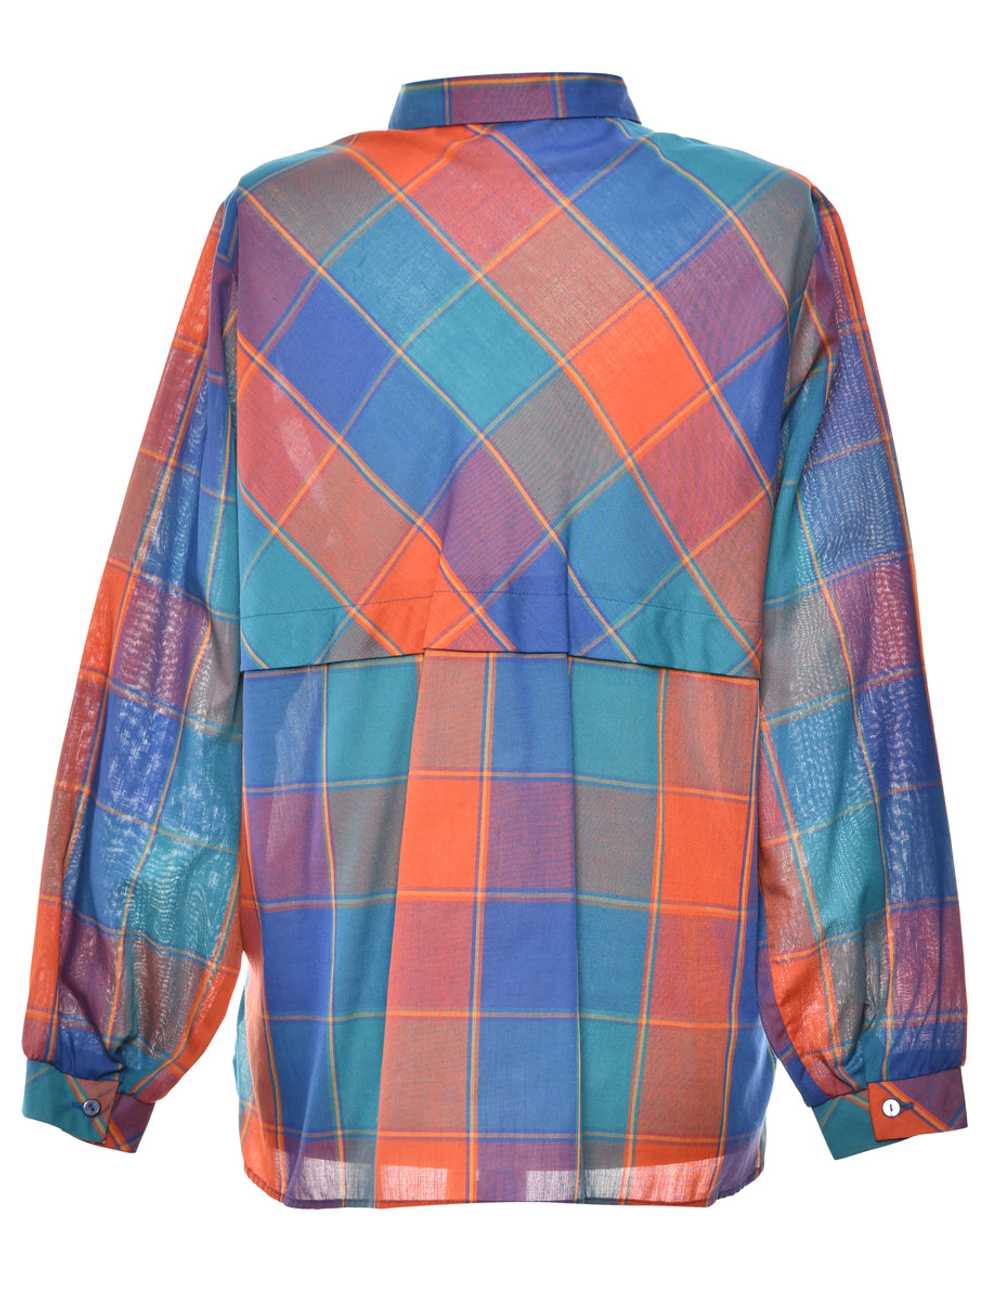 Checked Blue Blouse - L - image 2